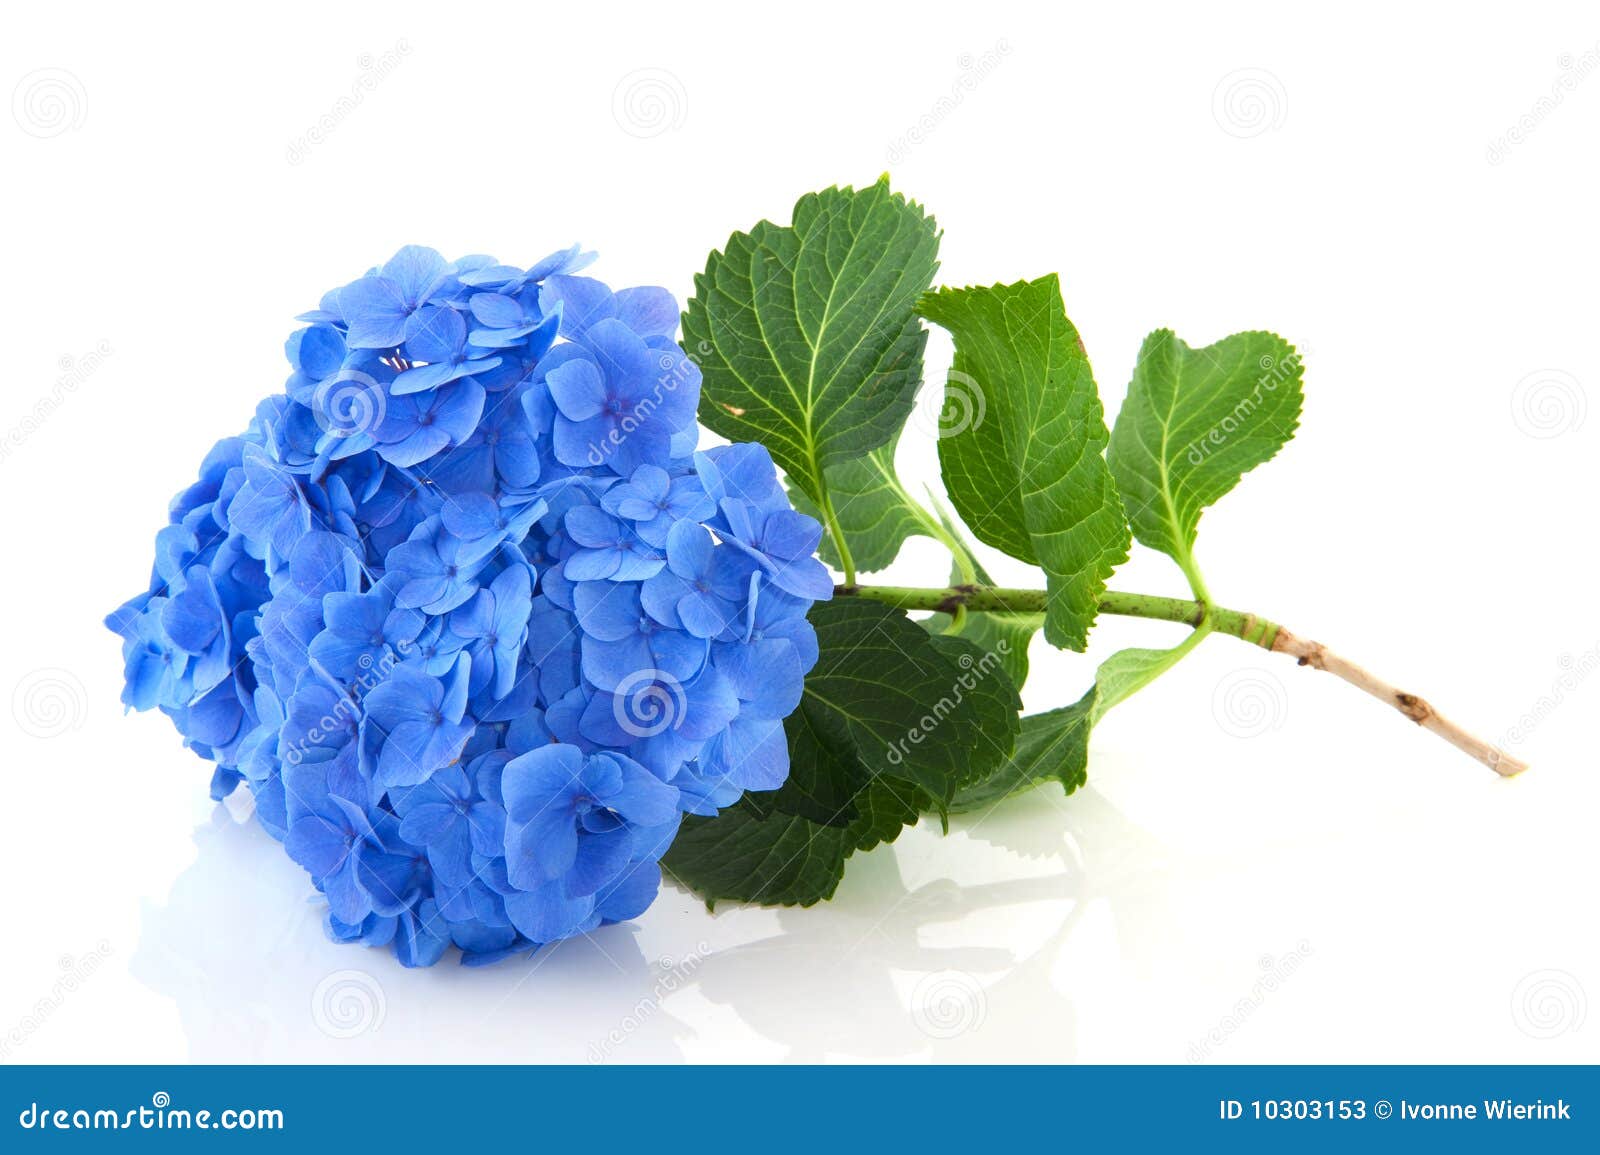 Floral Print Details about   Original PHOTOGRAPH of a beautiful BLUE HYDRANGEA in Bloom 